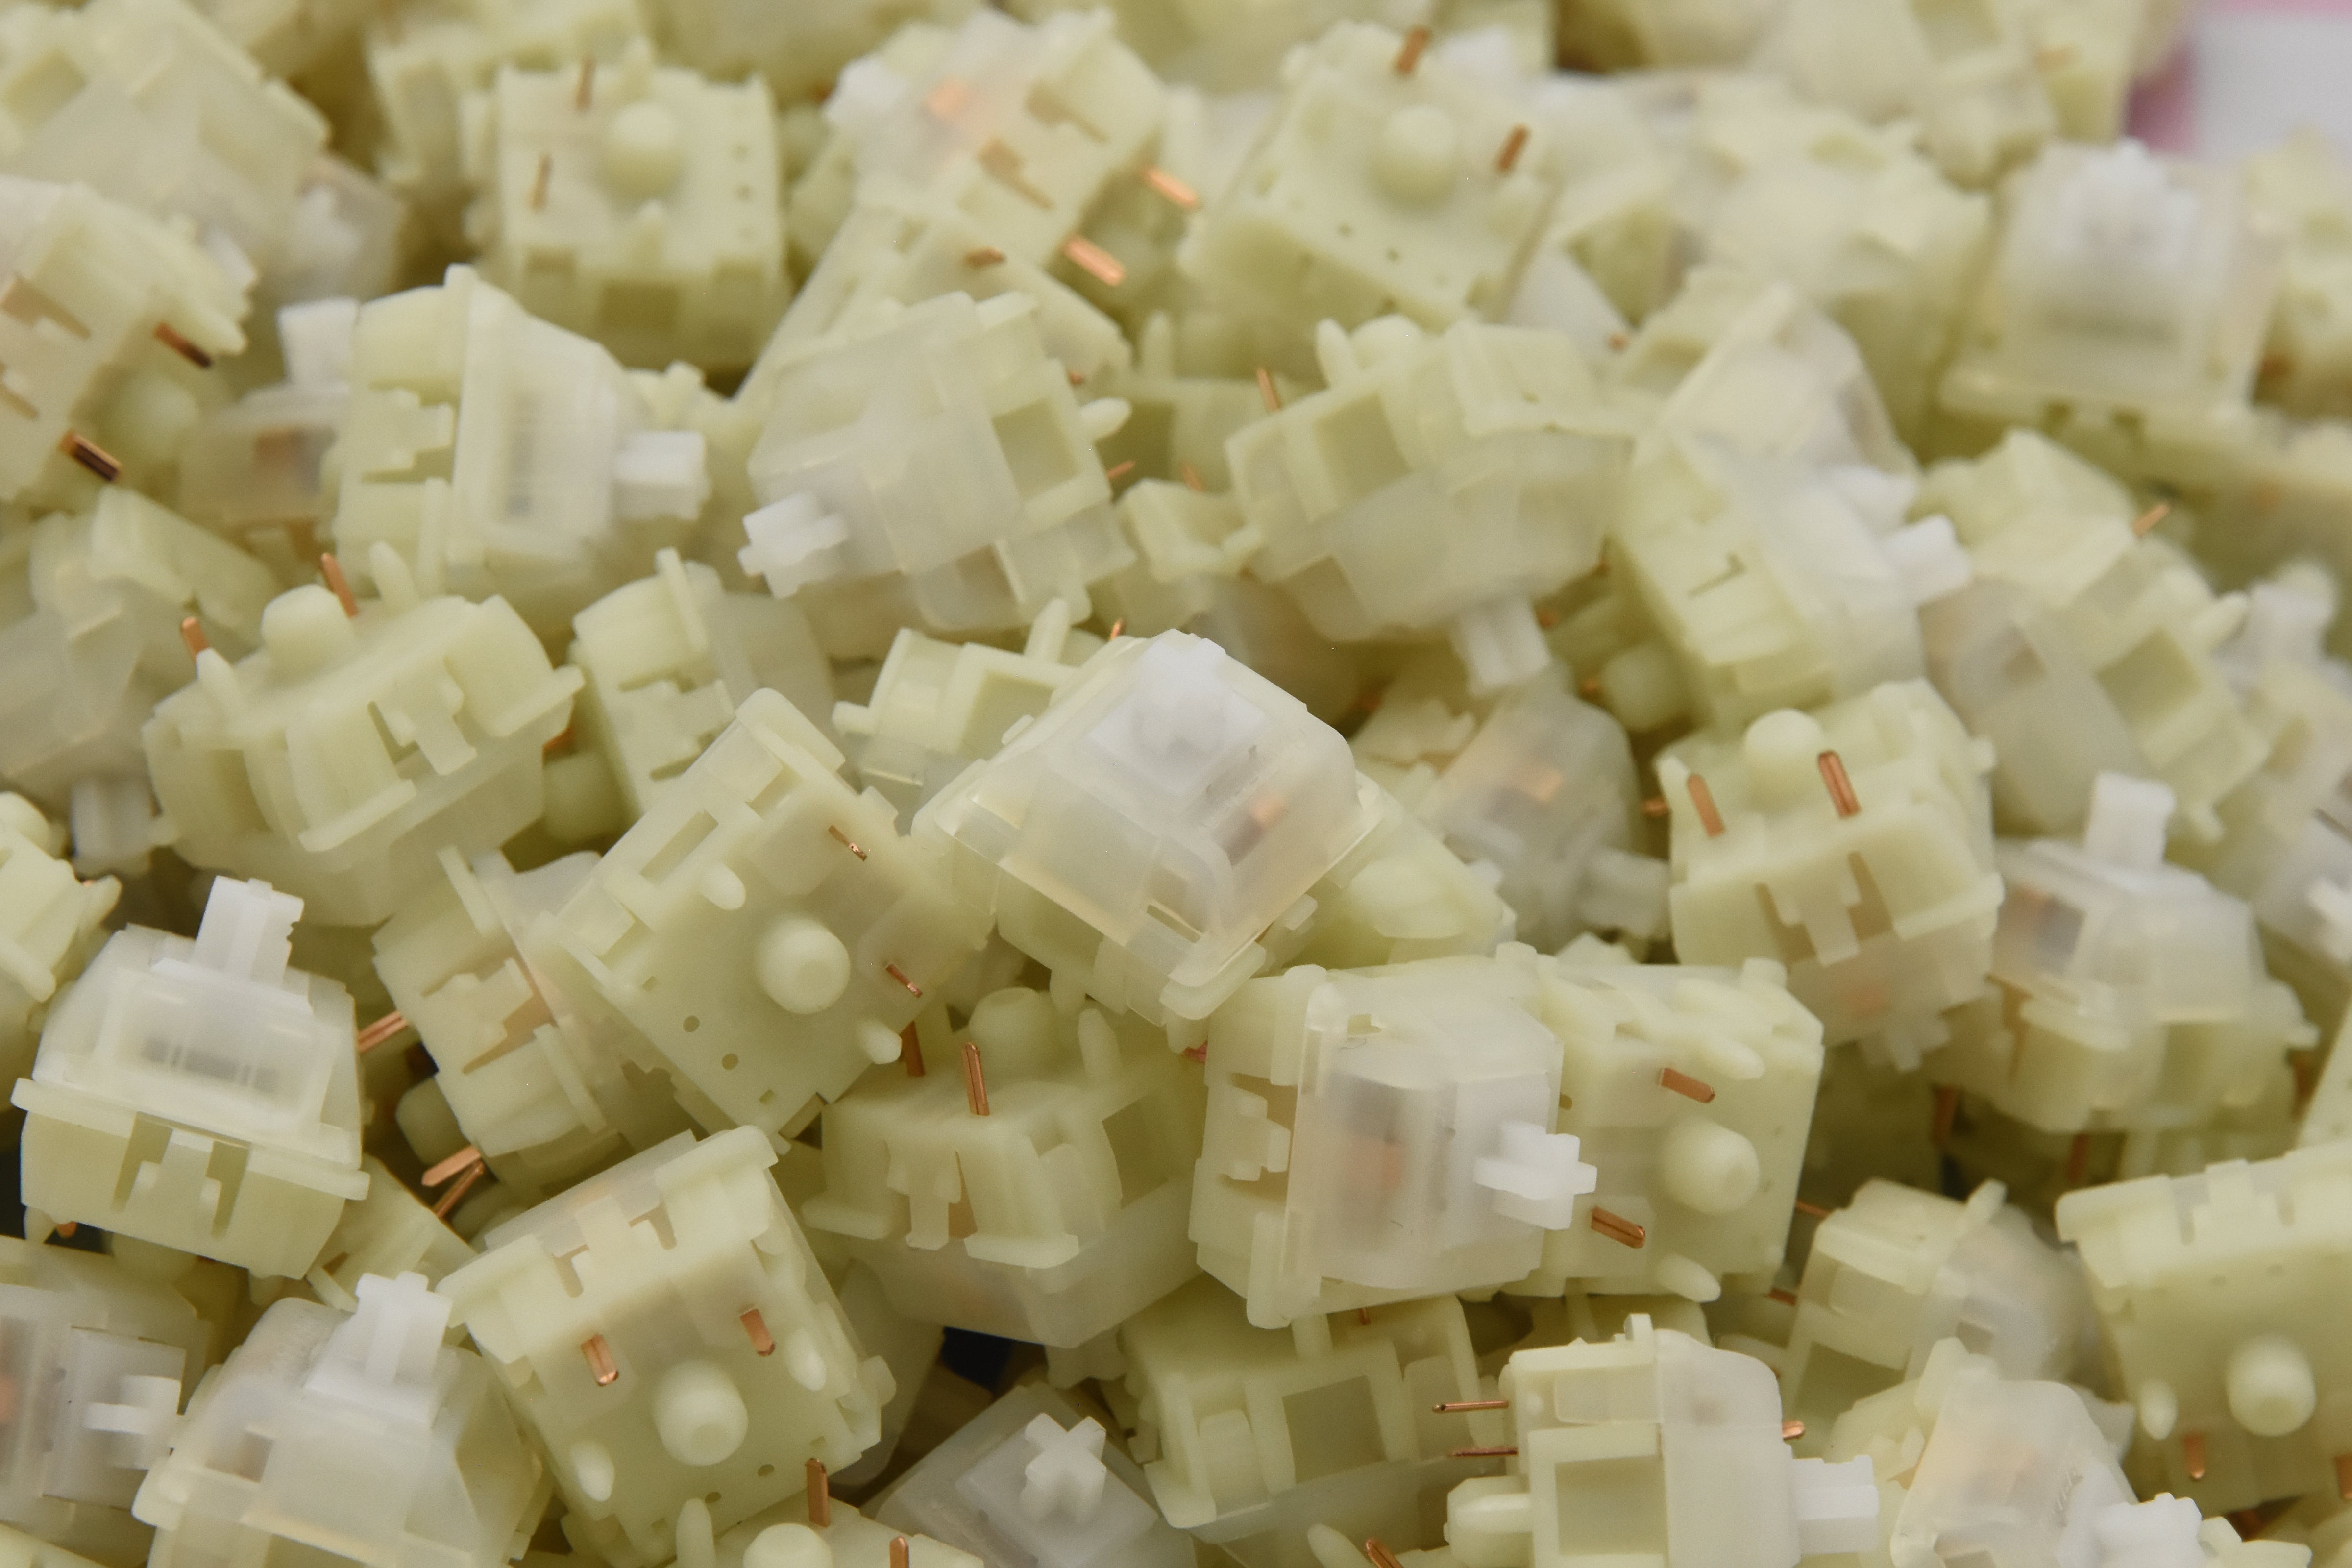 SILLYWORKS X GATERON TYPE L LINEAR SWITCH FACTORY LUBED EDITION (10PCS)